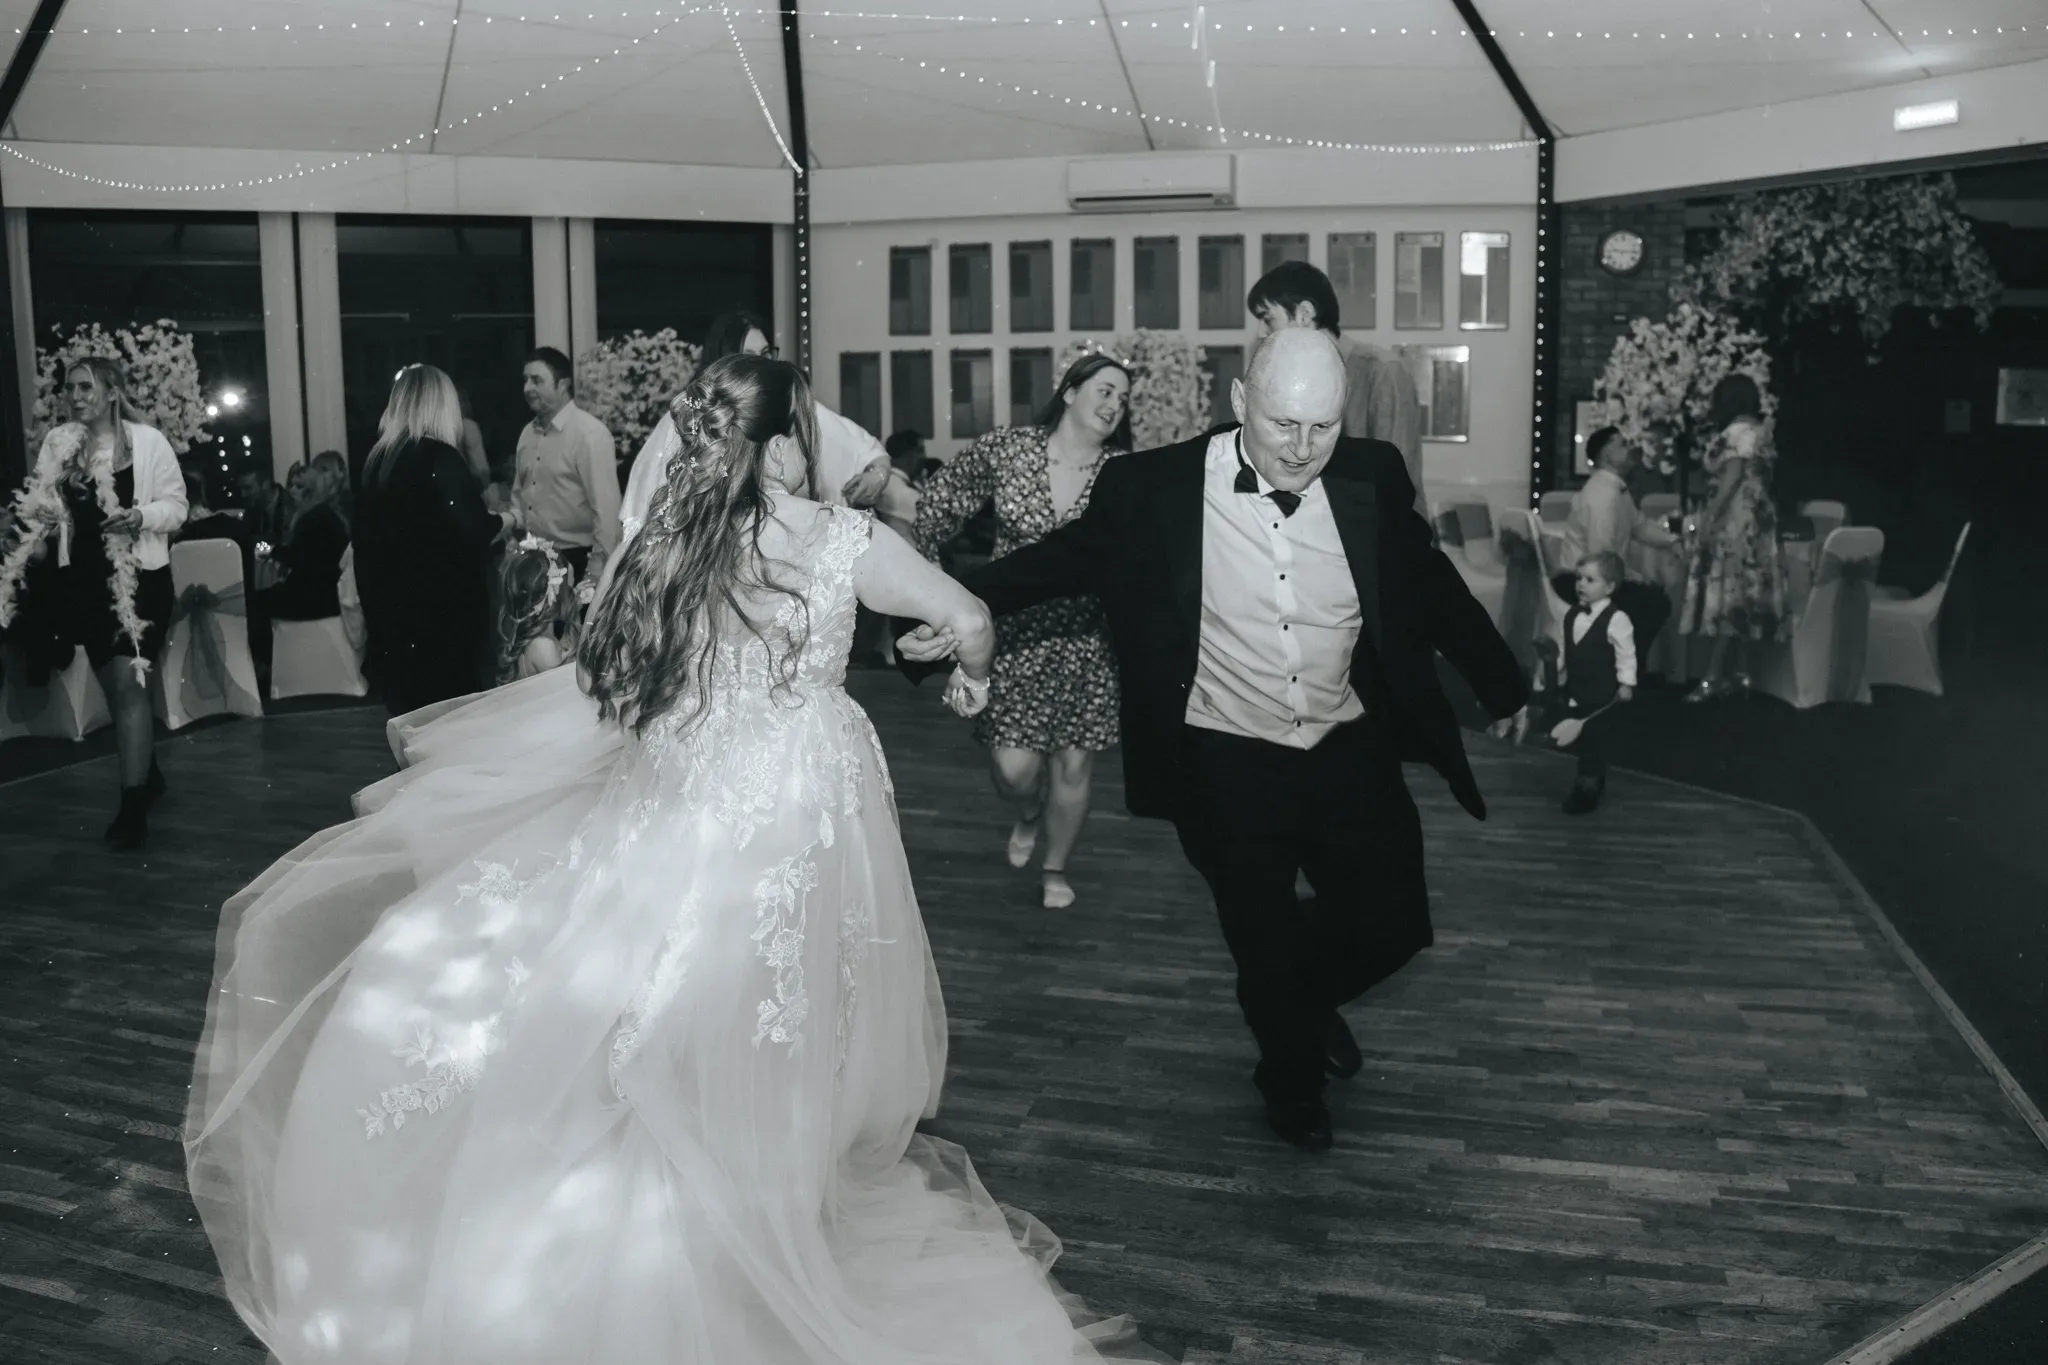 A bride and an older man dance joyfully at a wedding reception, surrounded by guests. the bride's detailed gown flows behind her as she moves, and string lights hang above the dance floor, enhancing the festive atmosphere.